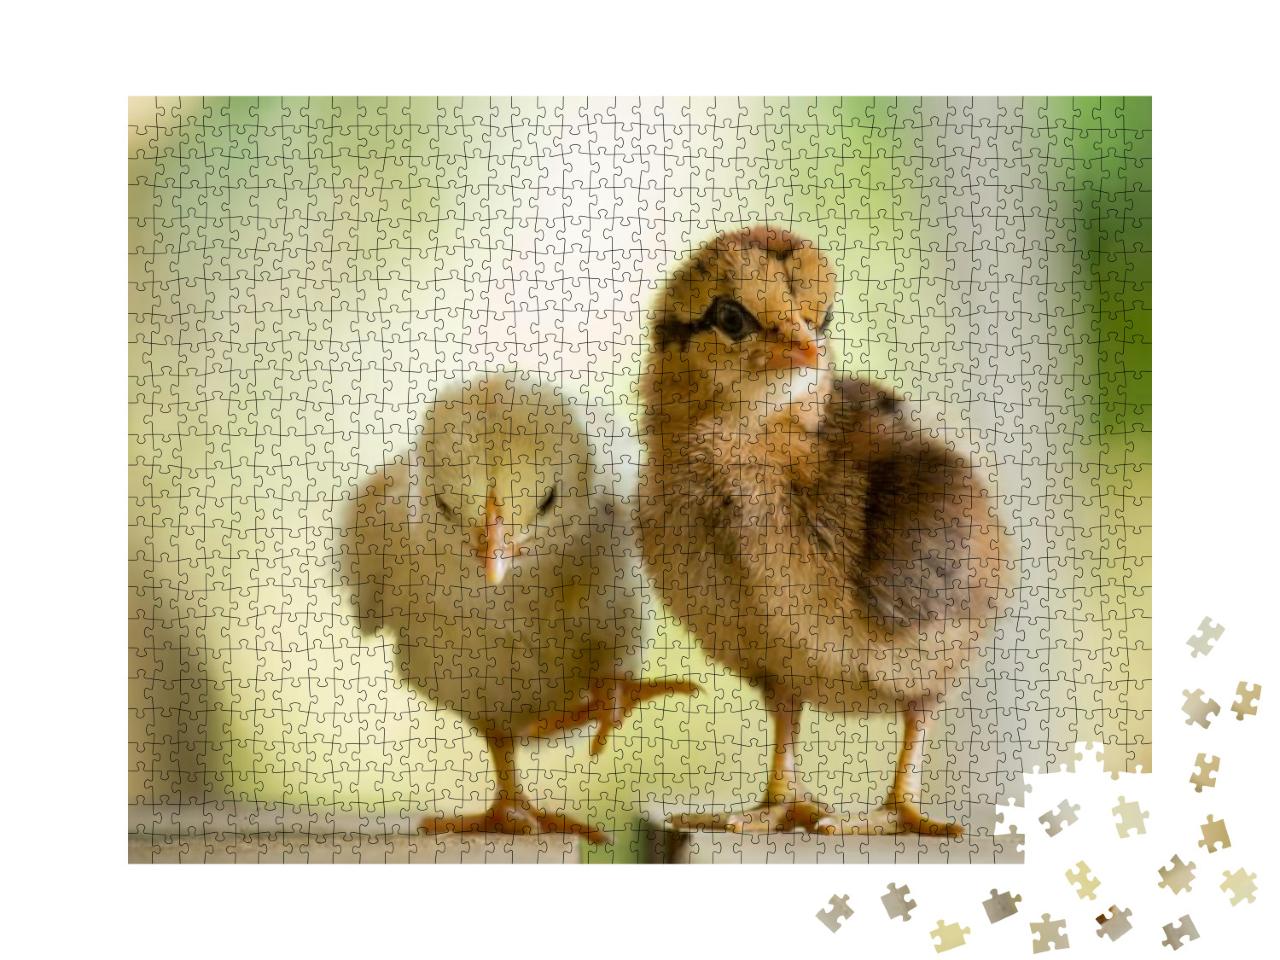 Twin or Couple of Little Chickens Friend Between Brown &... Jigsaw Puzzle with 1000 pieces